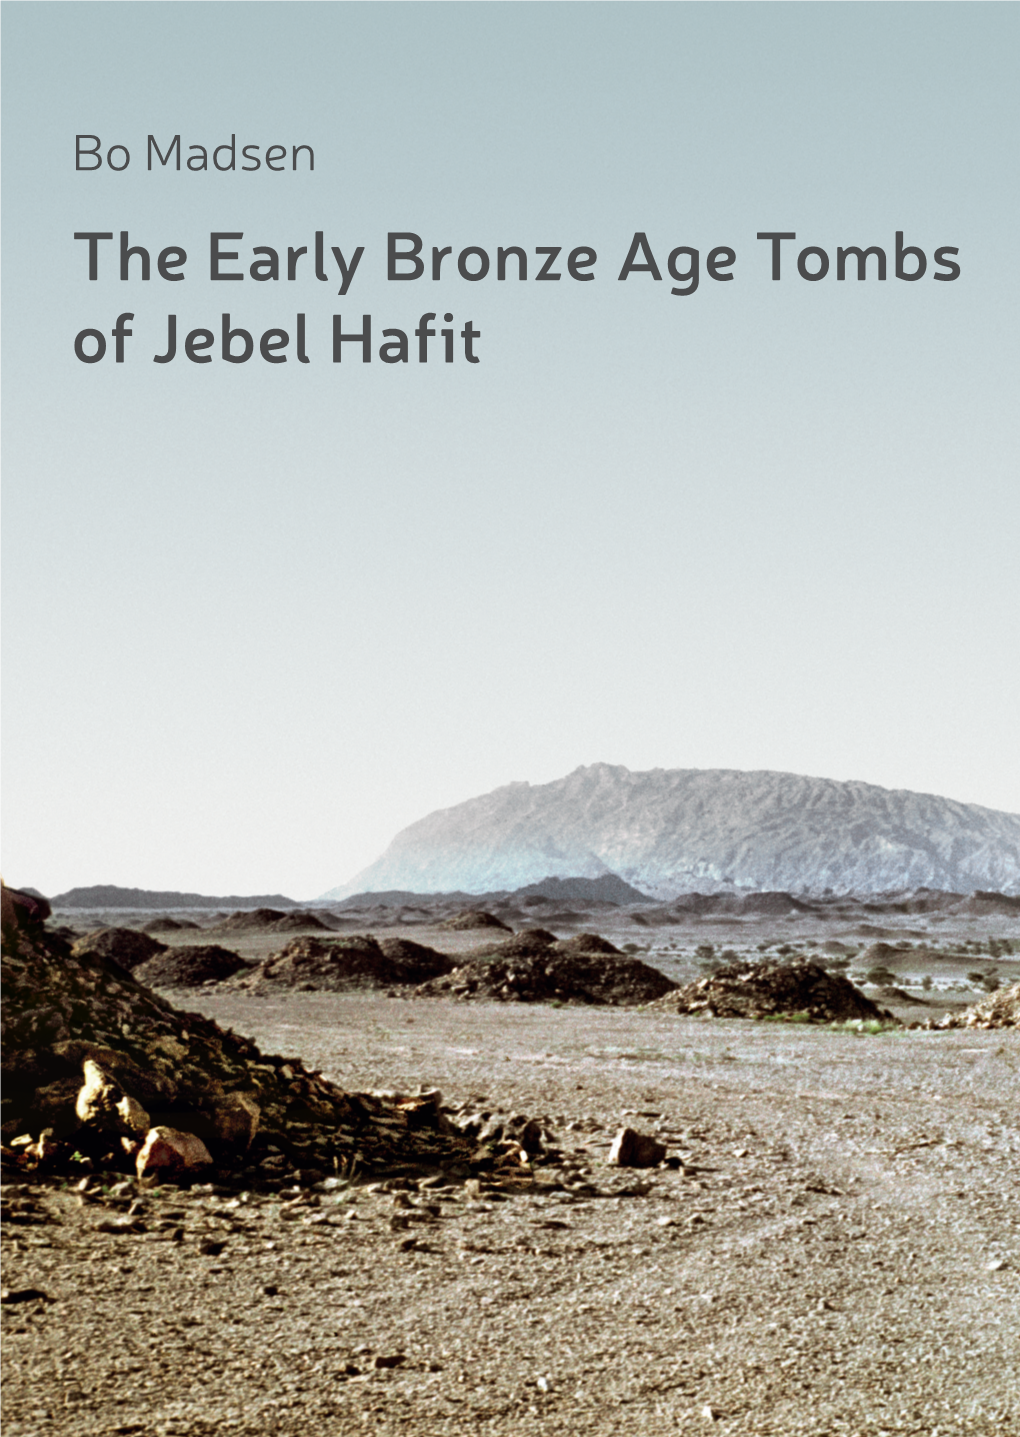 The Early Bronze Age Tombs of Jebel Hafit Bo Madsen the Early Bronze Age Tombs of Jebel Hafit